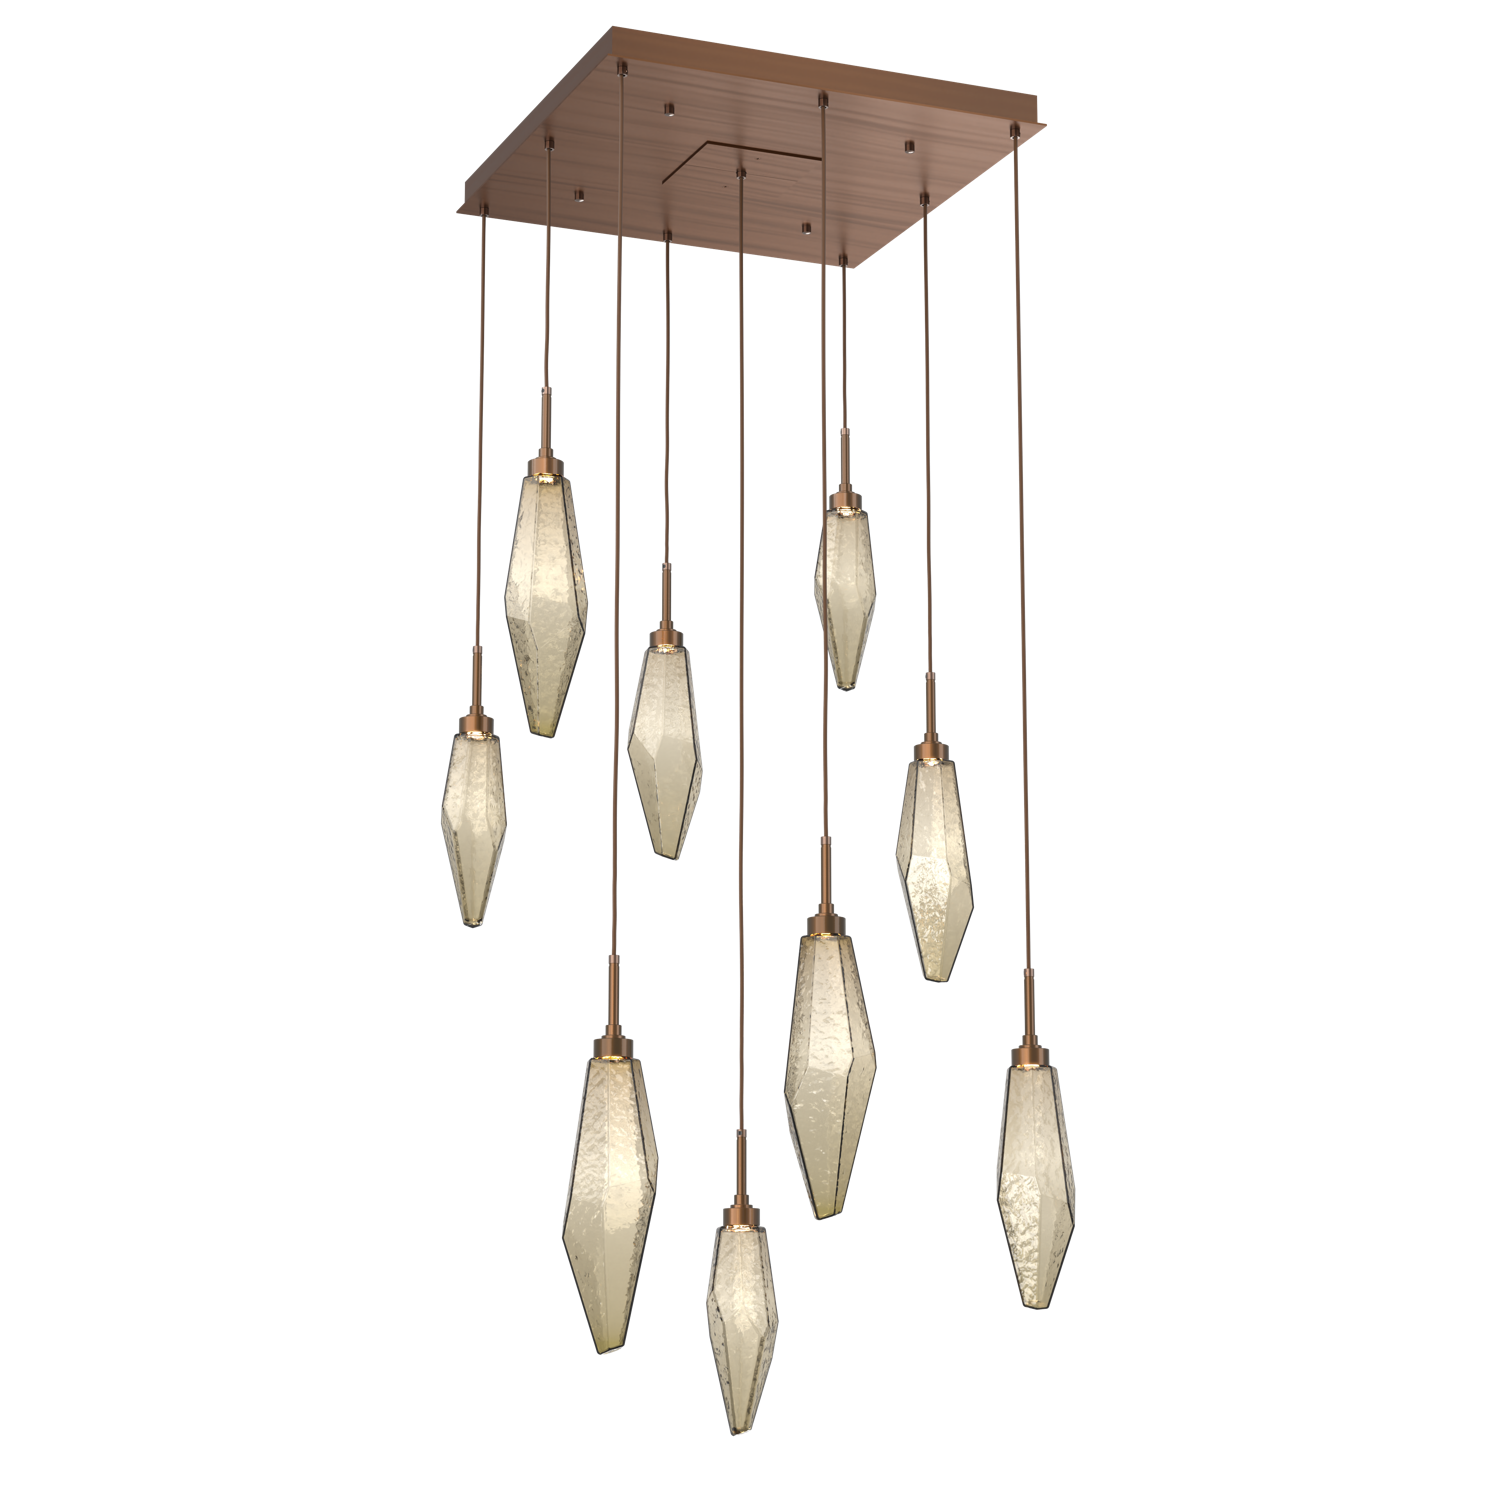 CHB0050-09-RB-CB-Hammerton-Studio-Rock-Crystal-9-light-square-pendant-chandelier-with-oil-rubbed-bronze-finish-and-chilled-bronze-blown-glass-shades-and-LED-lamping